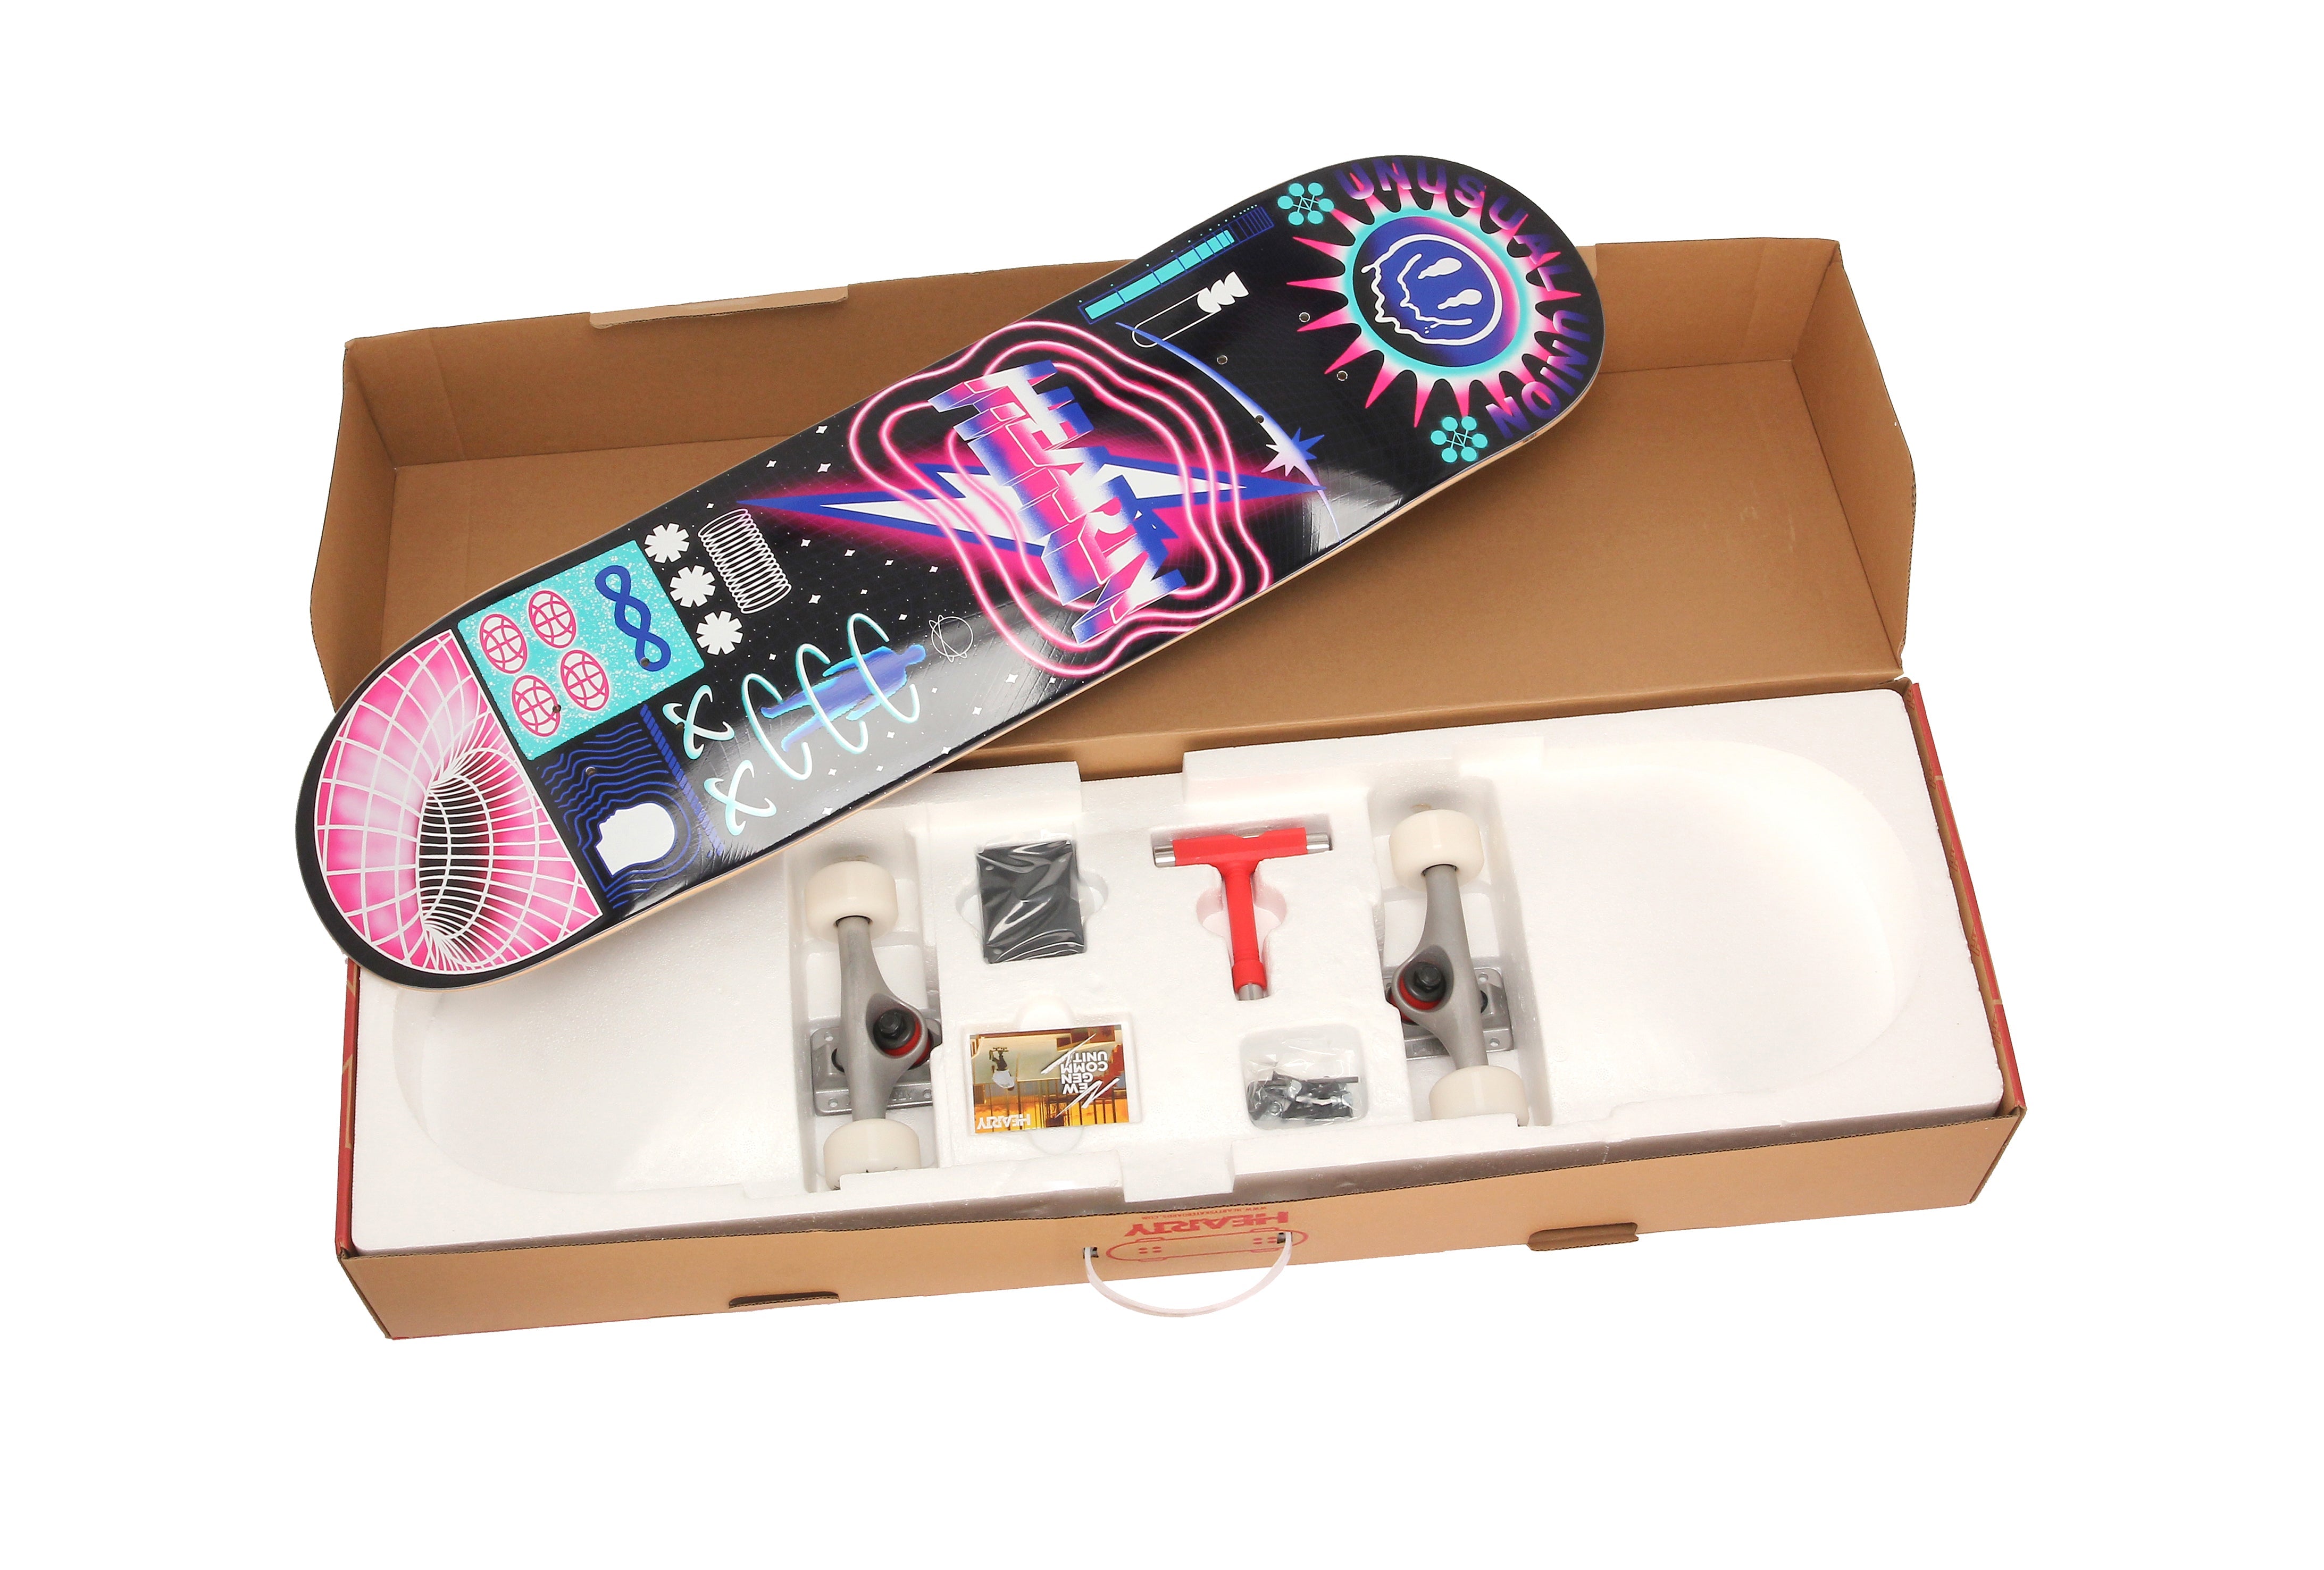 Hearty Pro-Complete Skateboard Pack- Unassembled- 8.0" & 8.25"- Universal Union Pink